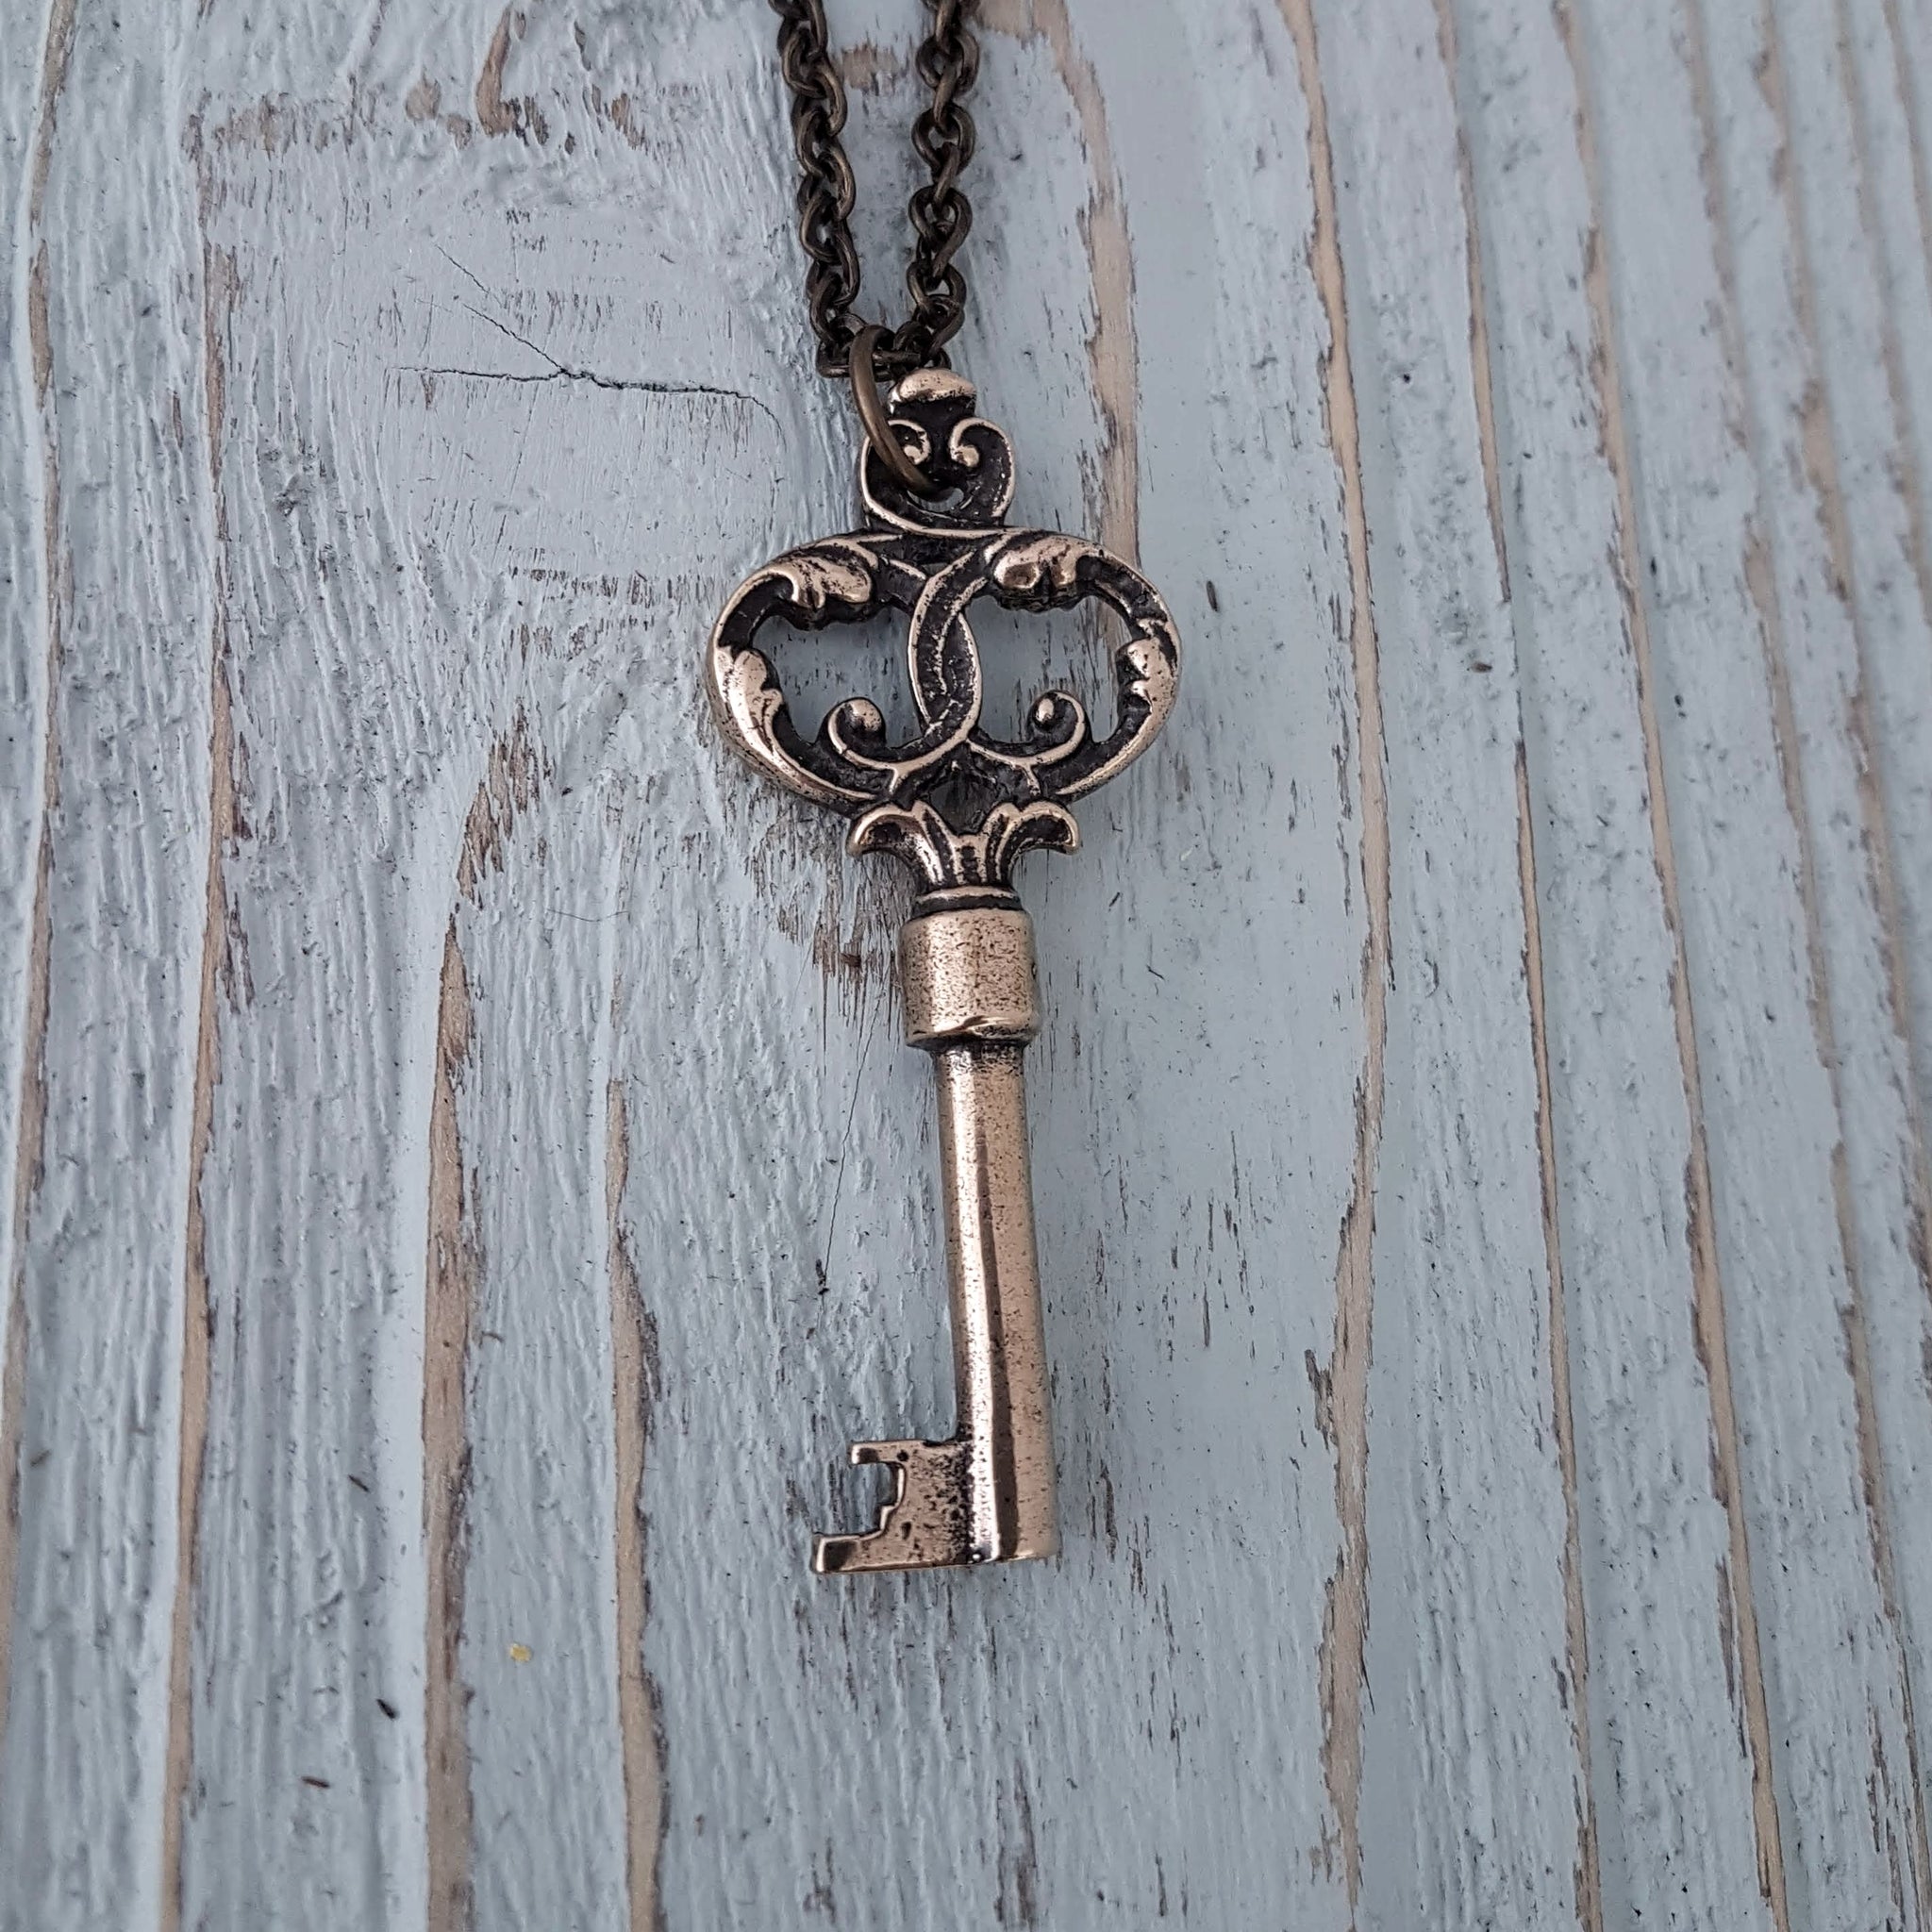 Heart Skeleton Key Necklace - Gwen Delicious Jewelry Designs